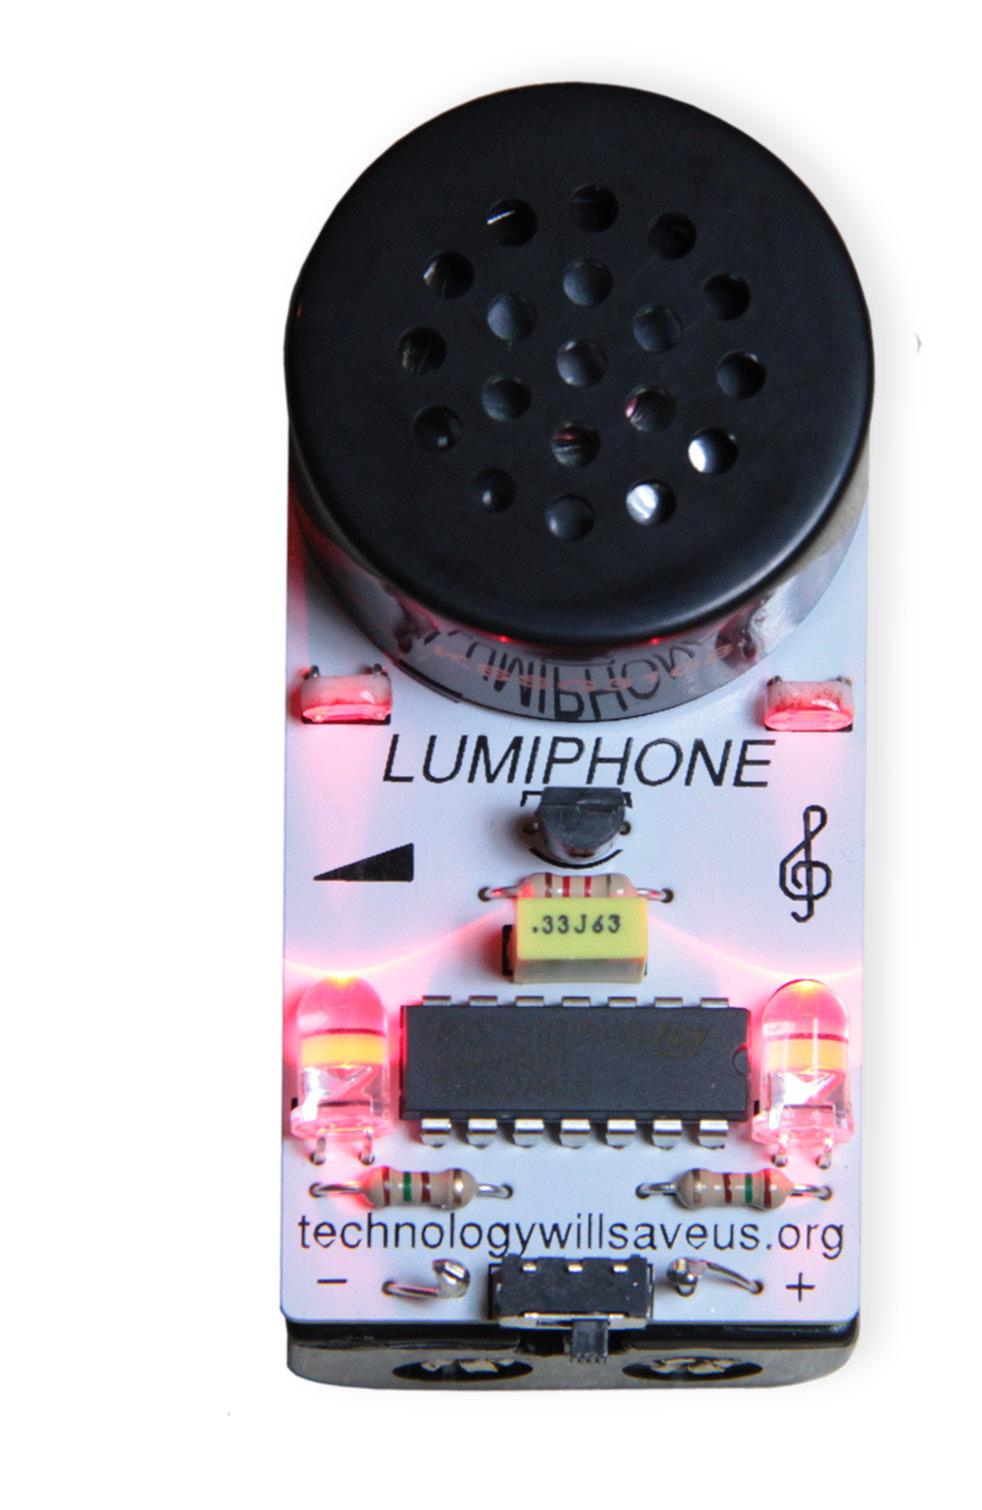 TECHNOLOGY WILL SAVE US: THE LUMIPHONE This is a step-by-step guide to soldering